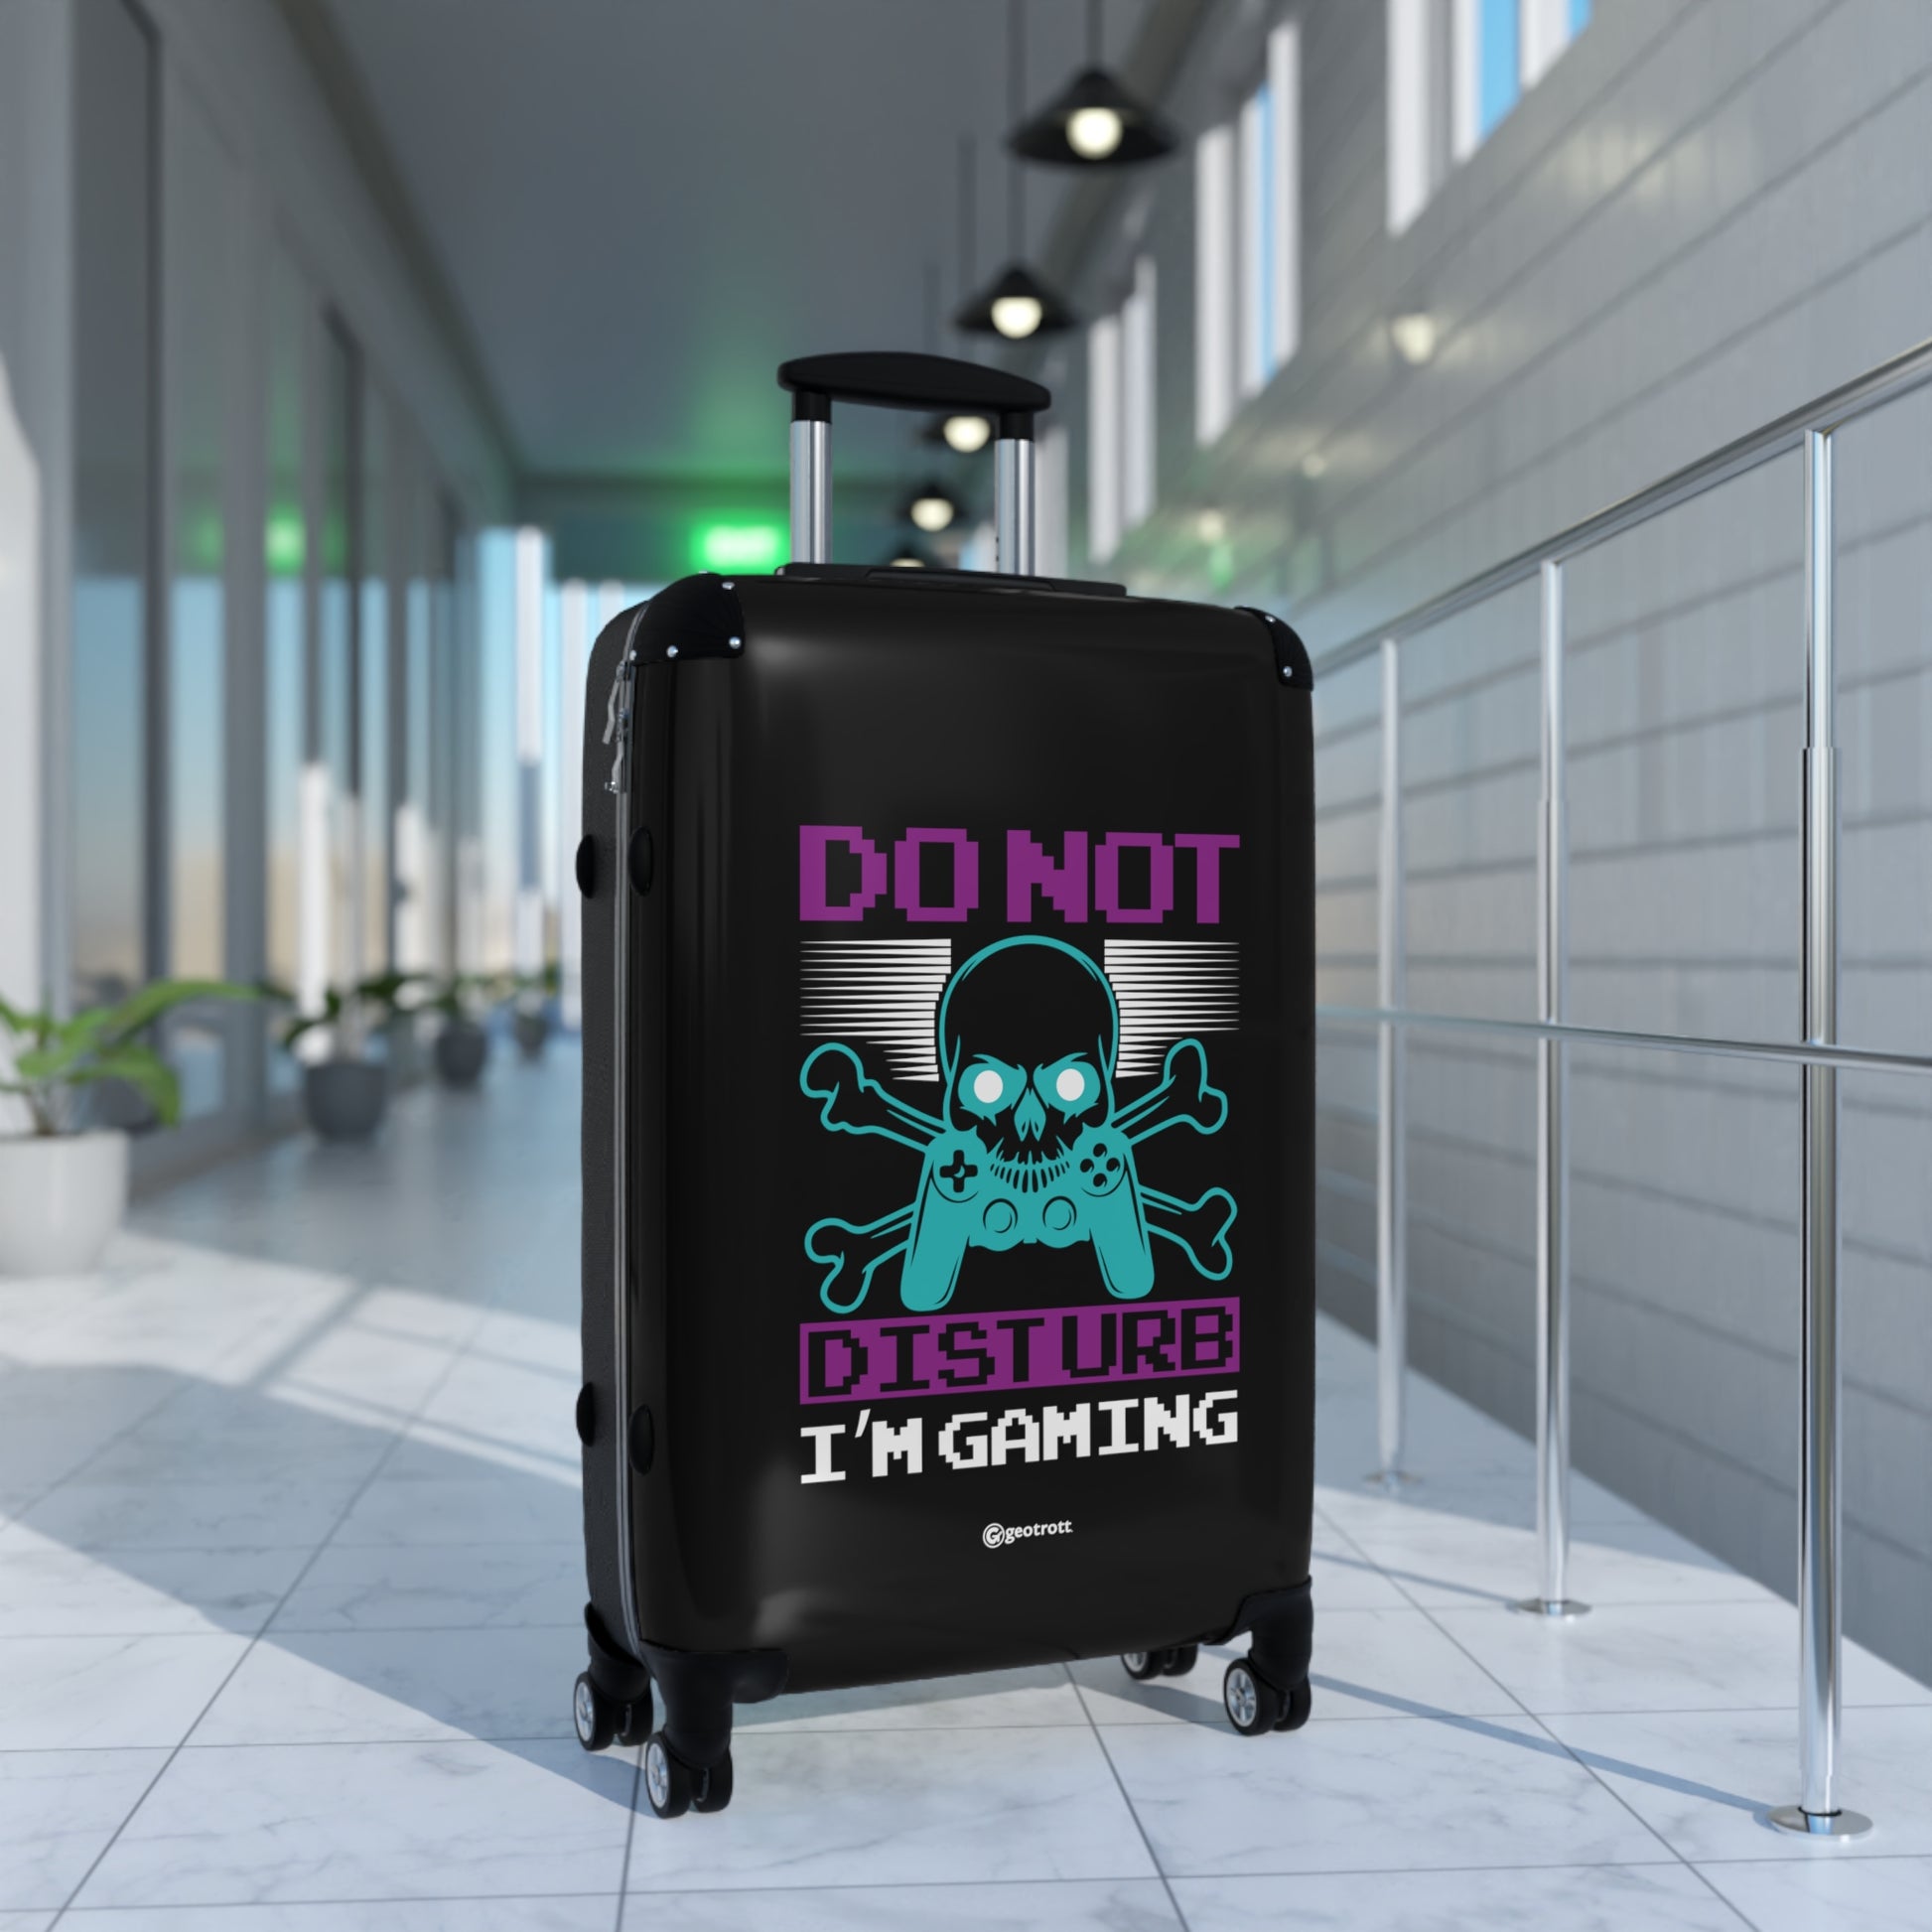 Do not Disturb I'm Gaming 3 Gamer Gaming Suitcase-Bags-Geotrott